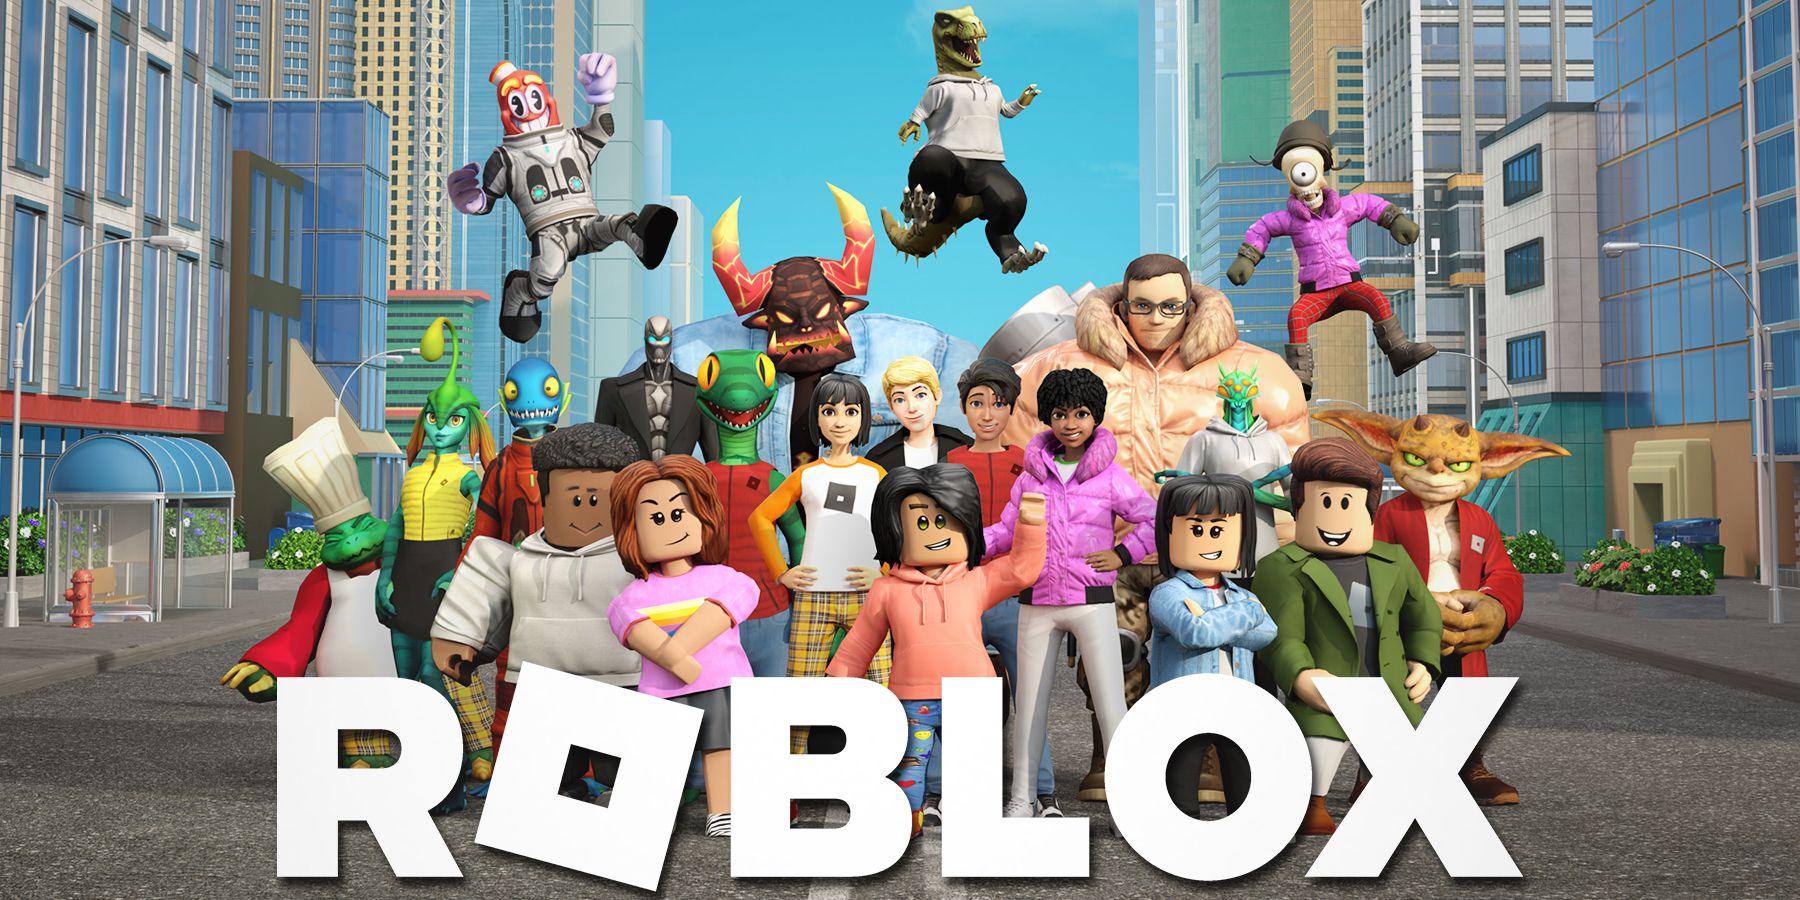 Roblox error code 503: What is it and how to fix it - Android